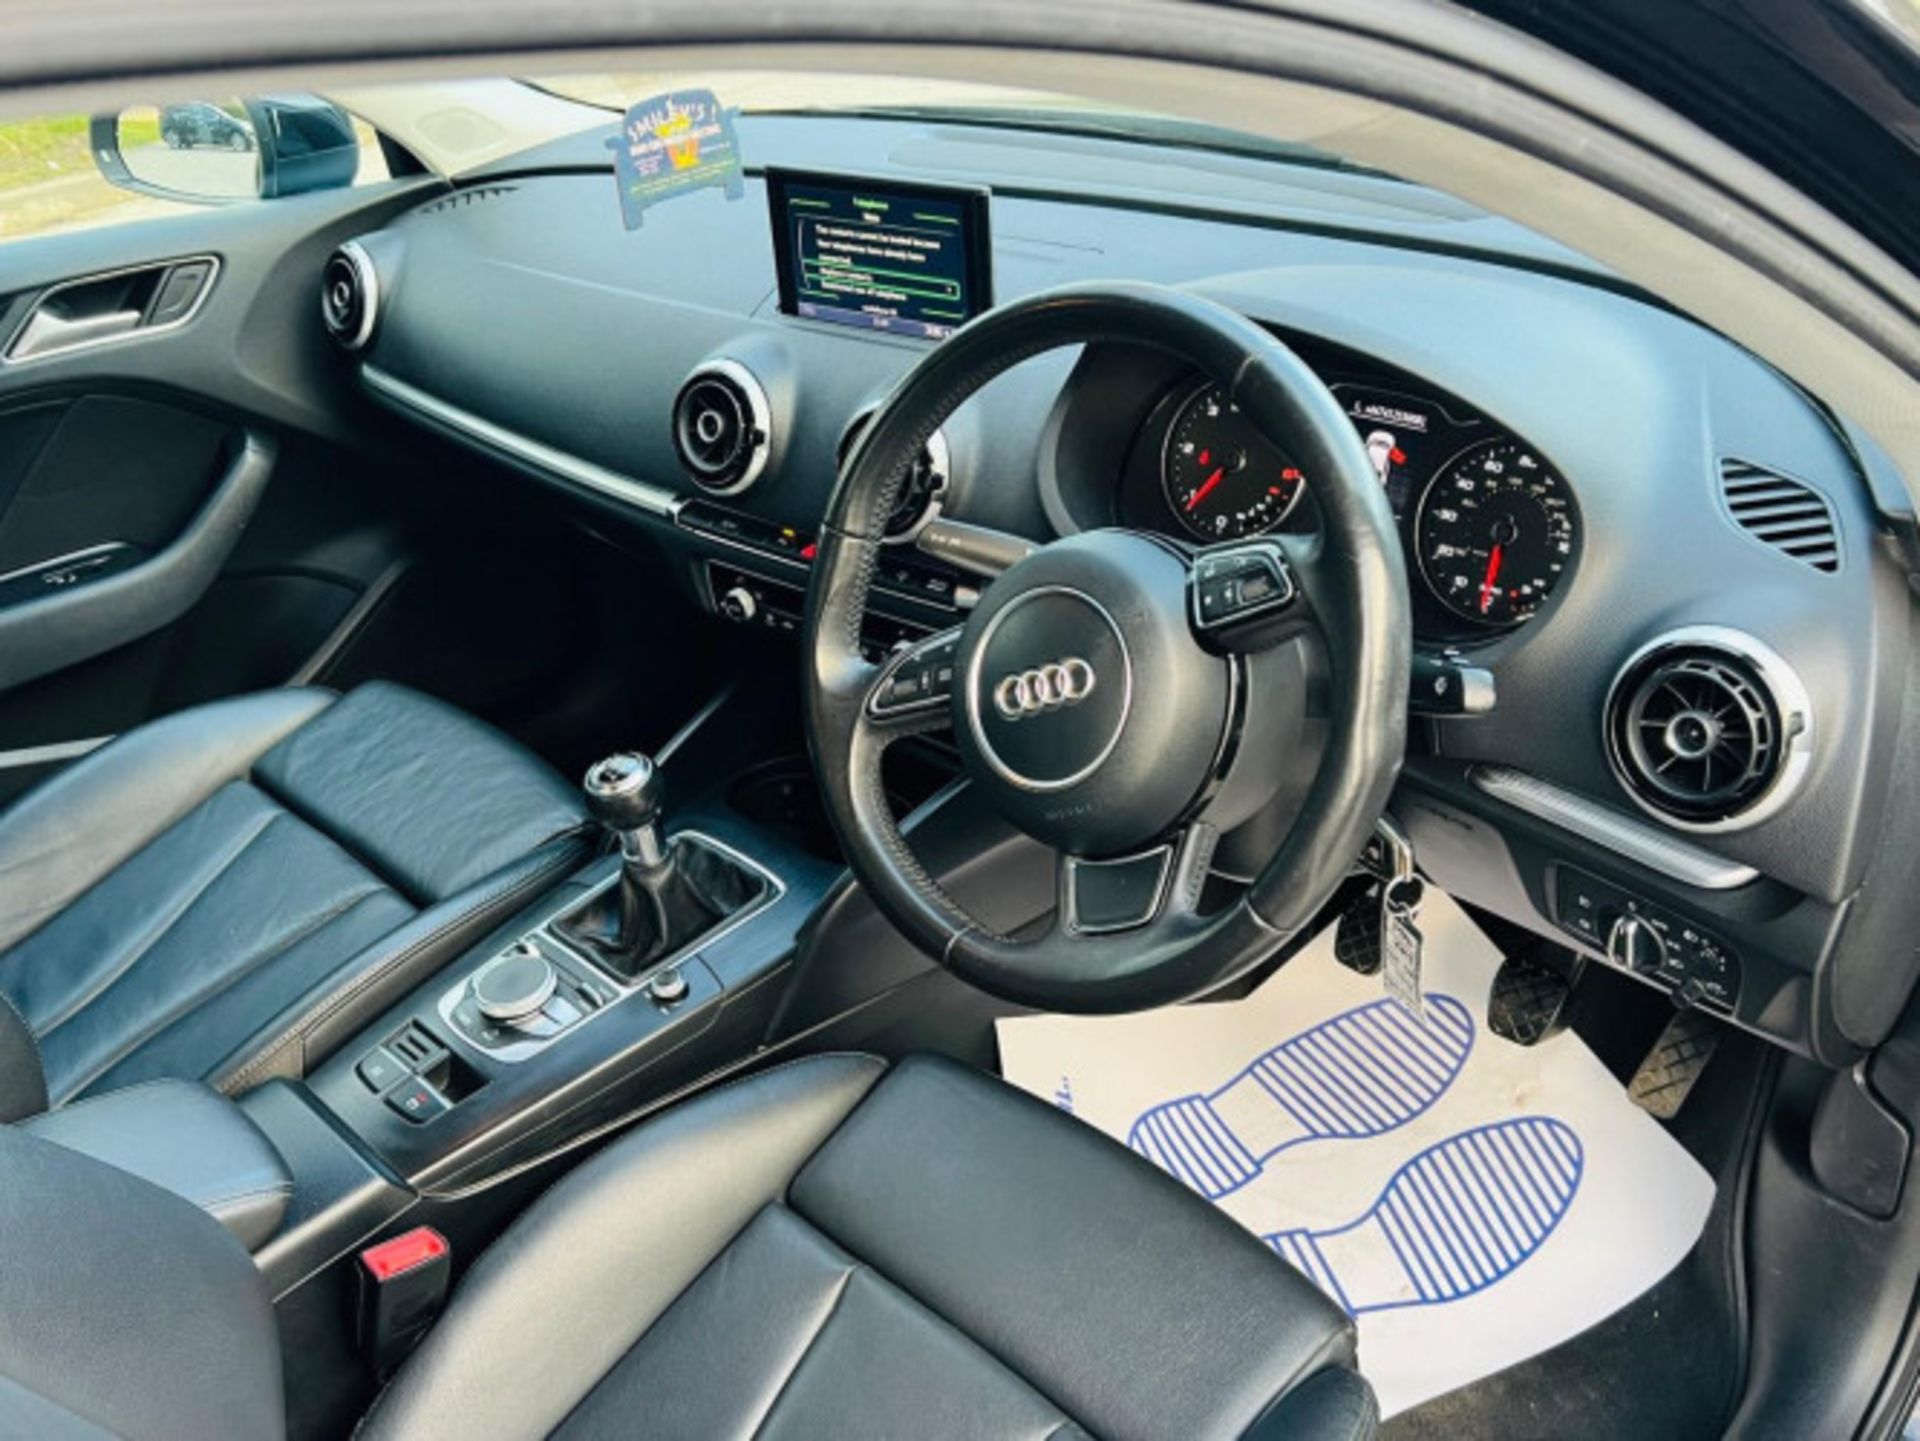 AUDI A3 2.0TDI SPORTBACK - STYLE, PERFORMANCE, AND COMFORT COMBINED >>--NO VAT ON HAMMER--<< - Image 146 of 216